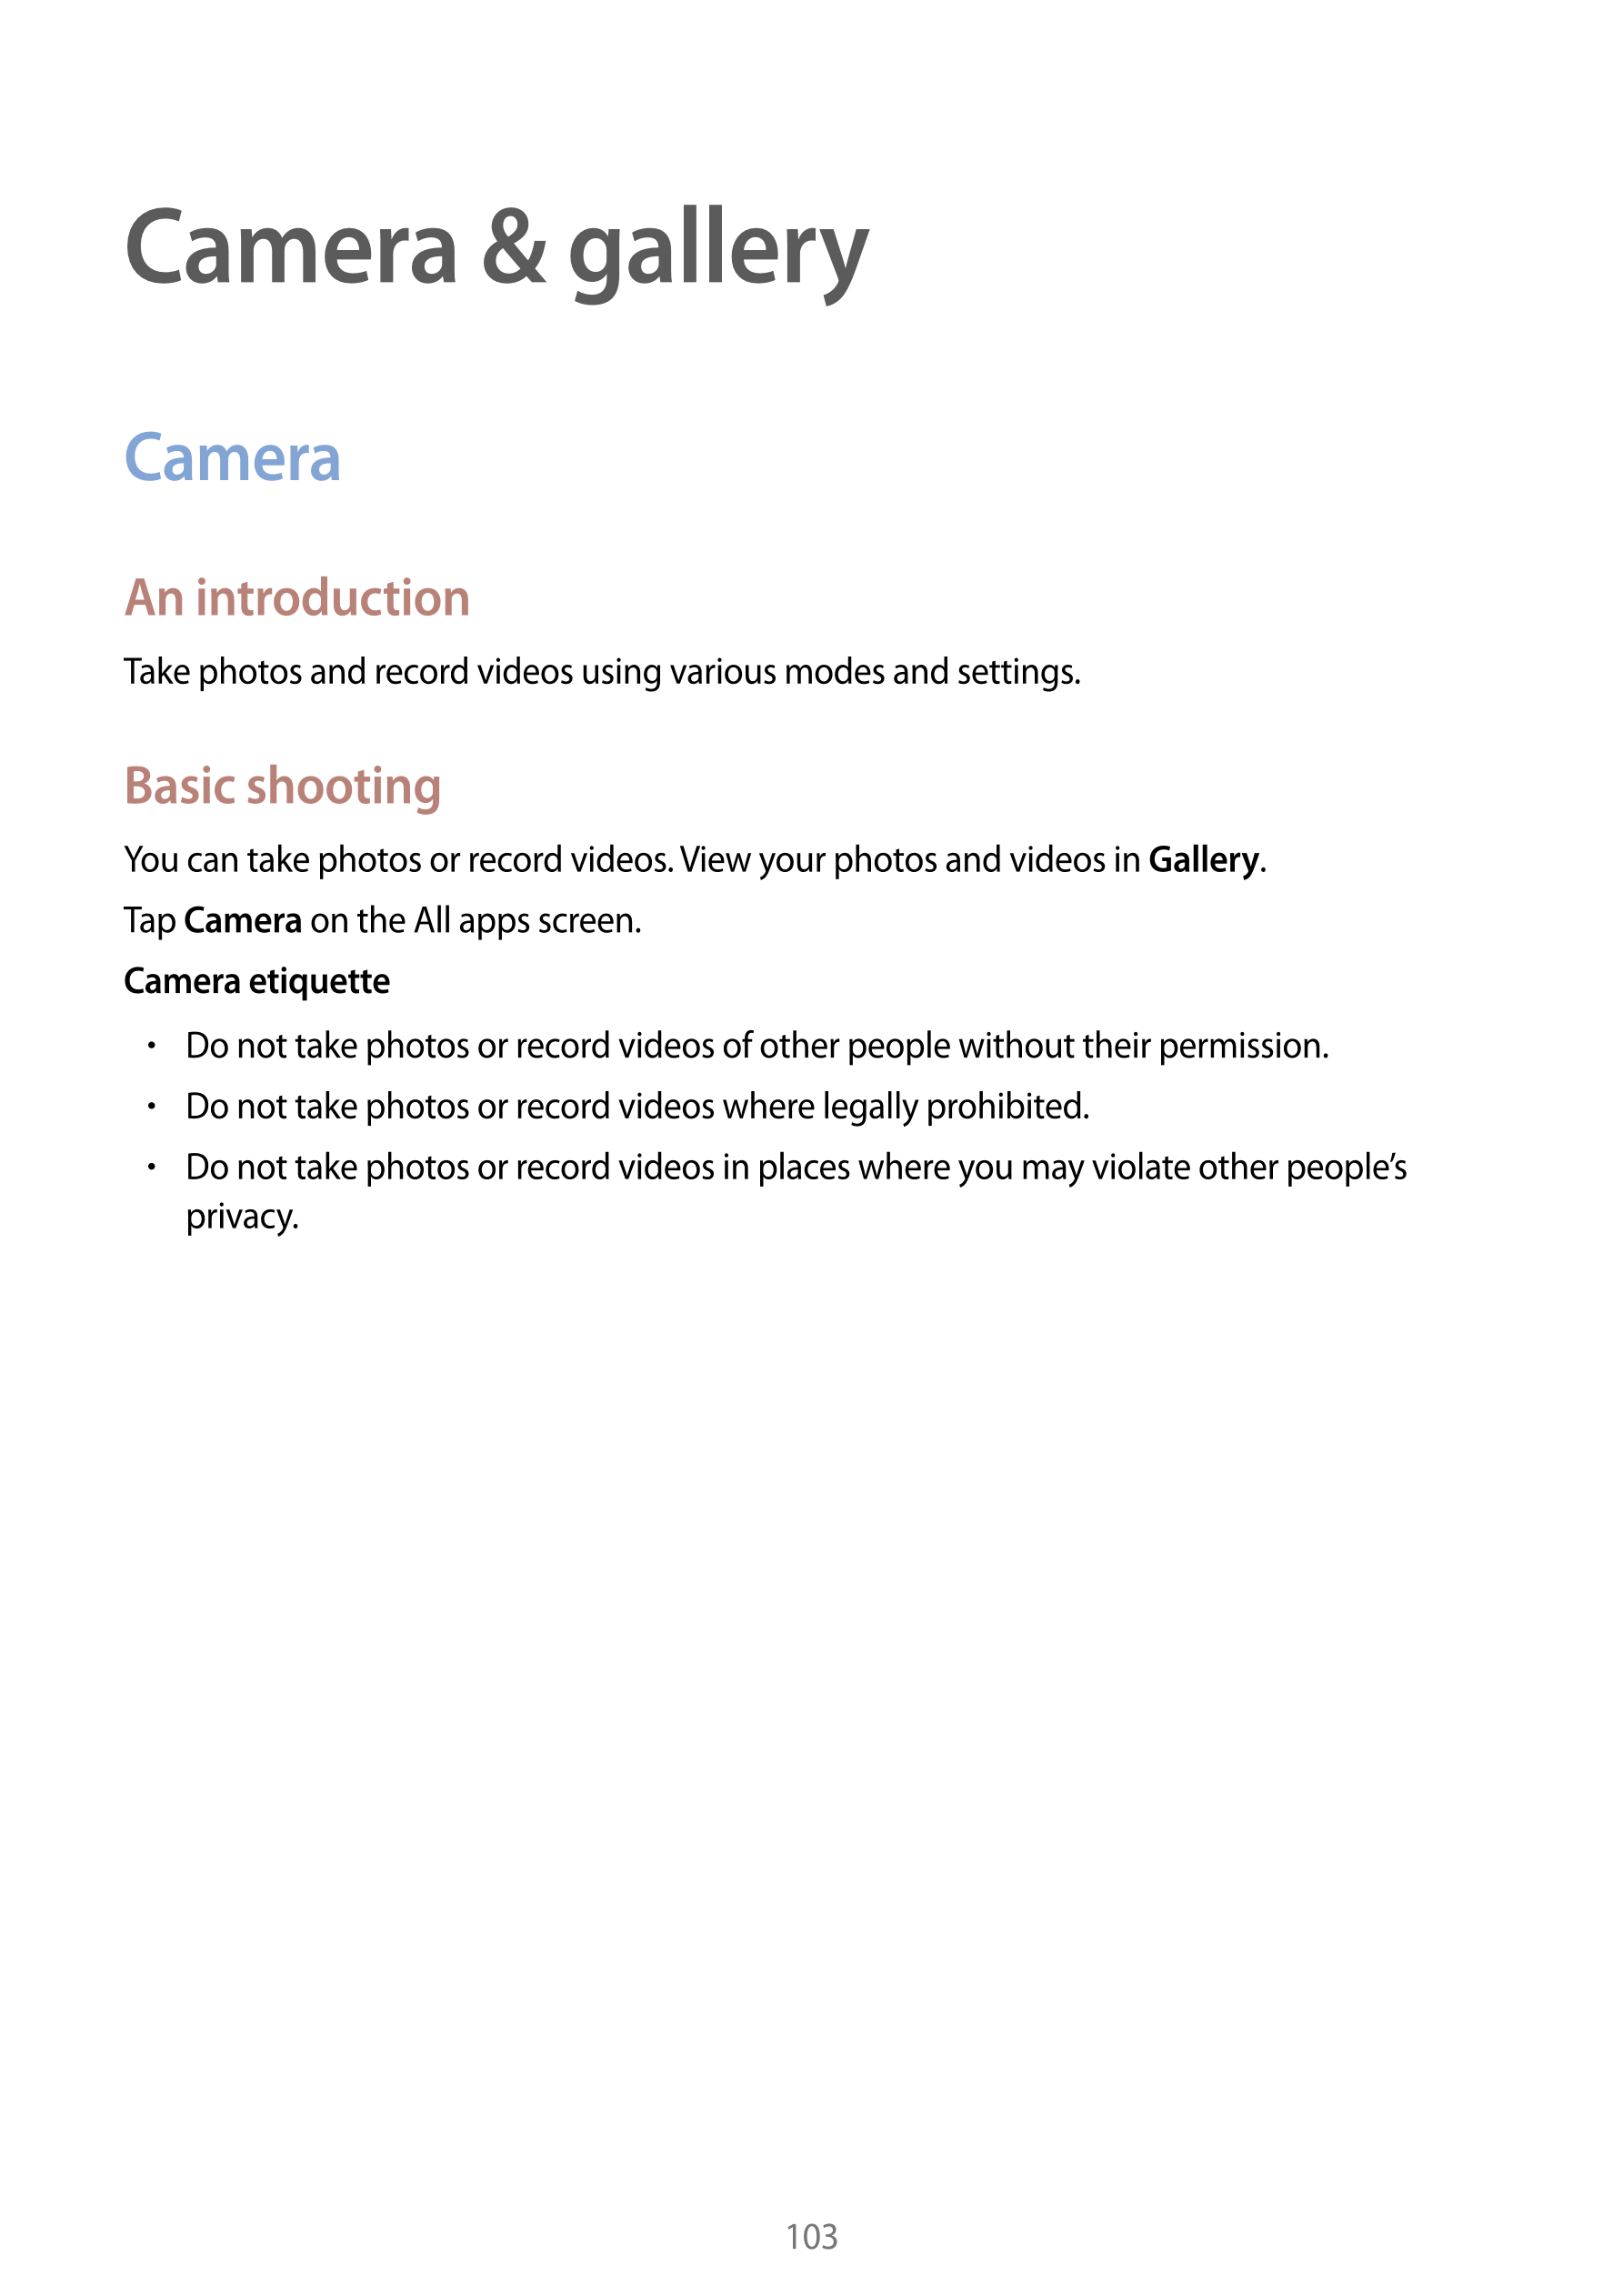 Camera & gallery
Camera
An introduction
Take photos and record videos using various modes and settings.
Basic shooting
You can t